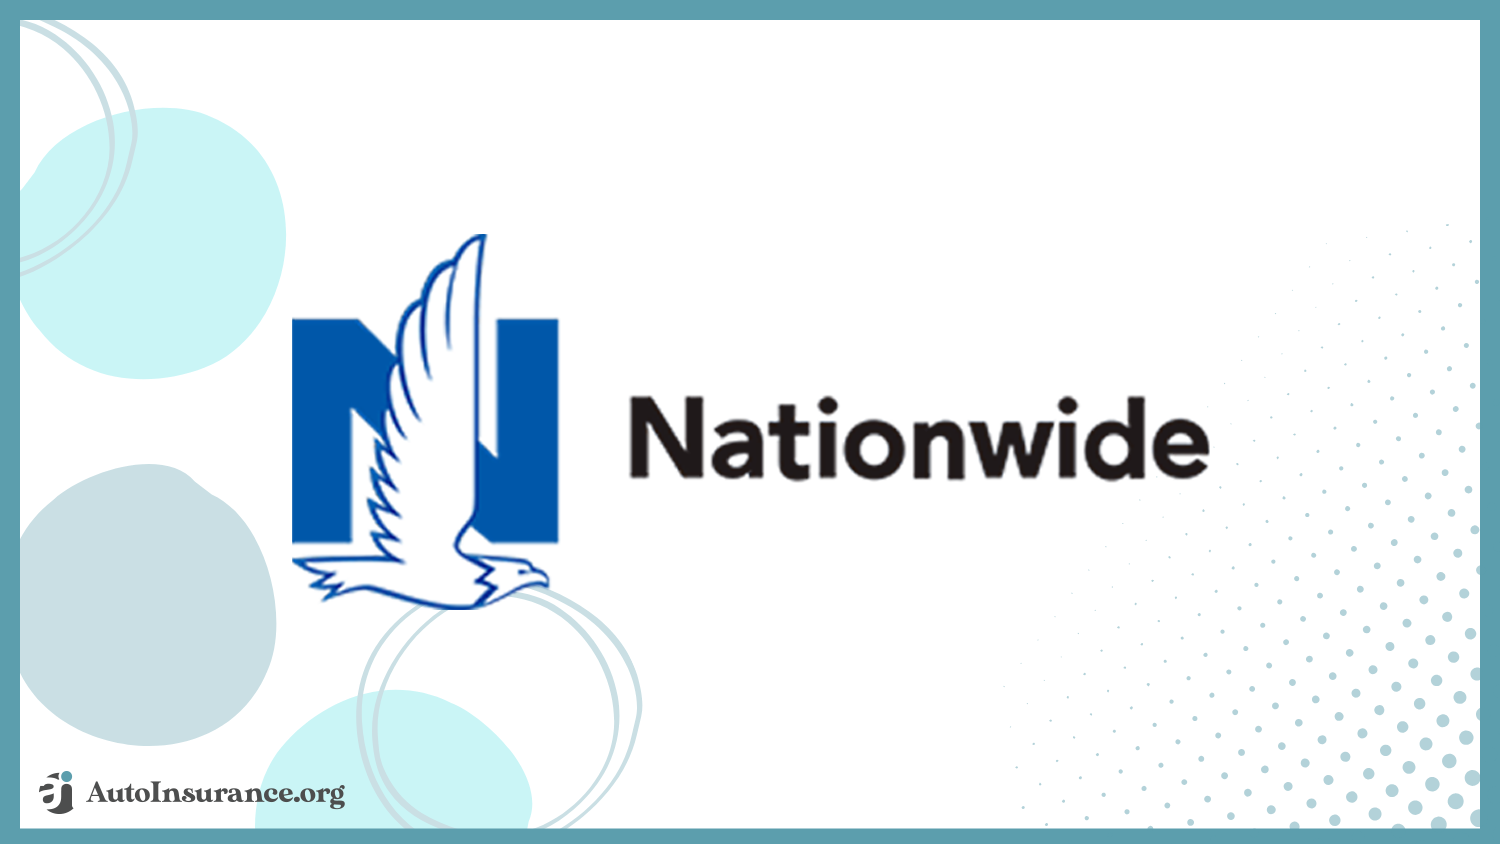 Nationwide: Best Auto Insurance for the Wealthy